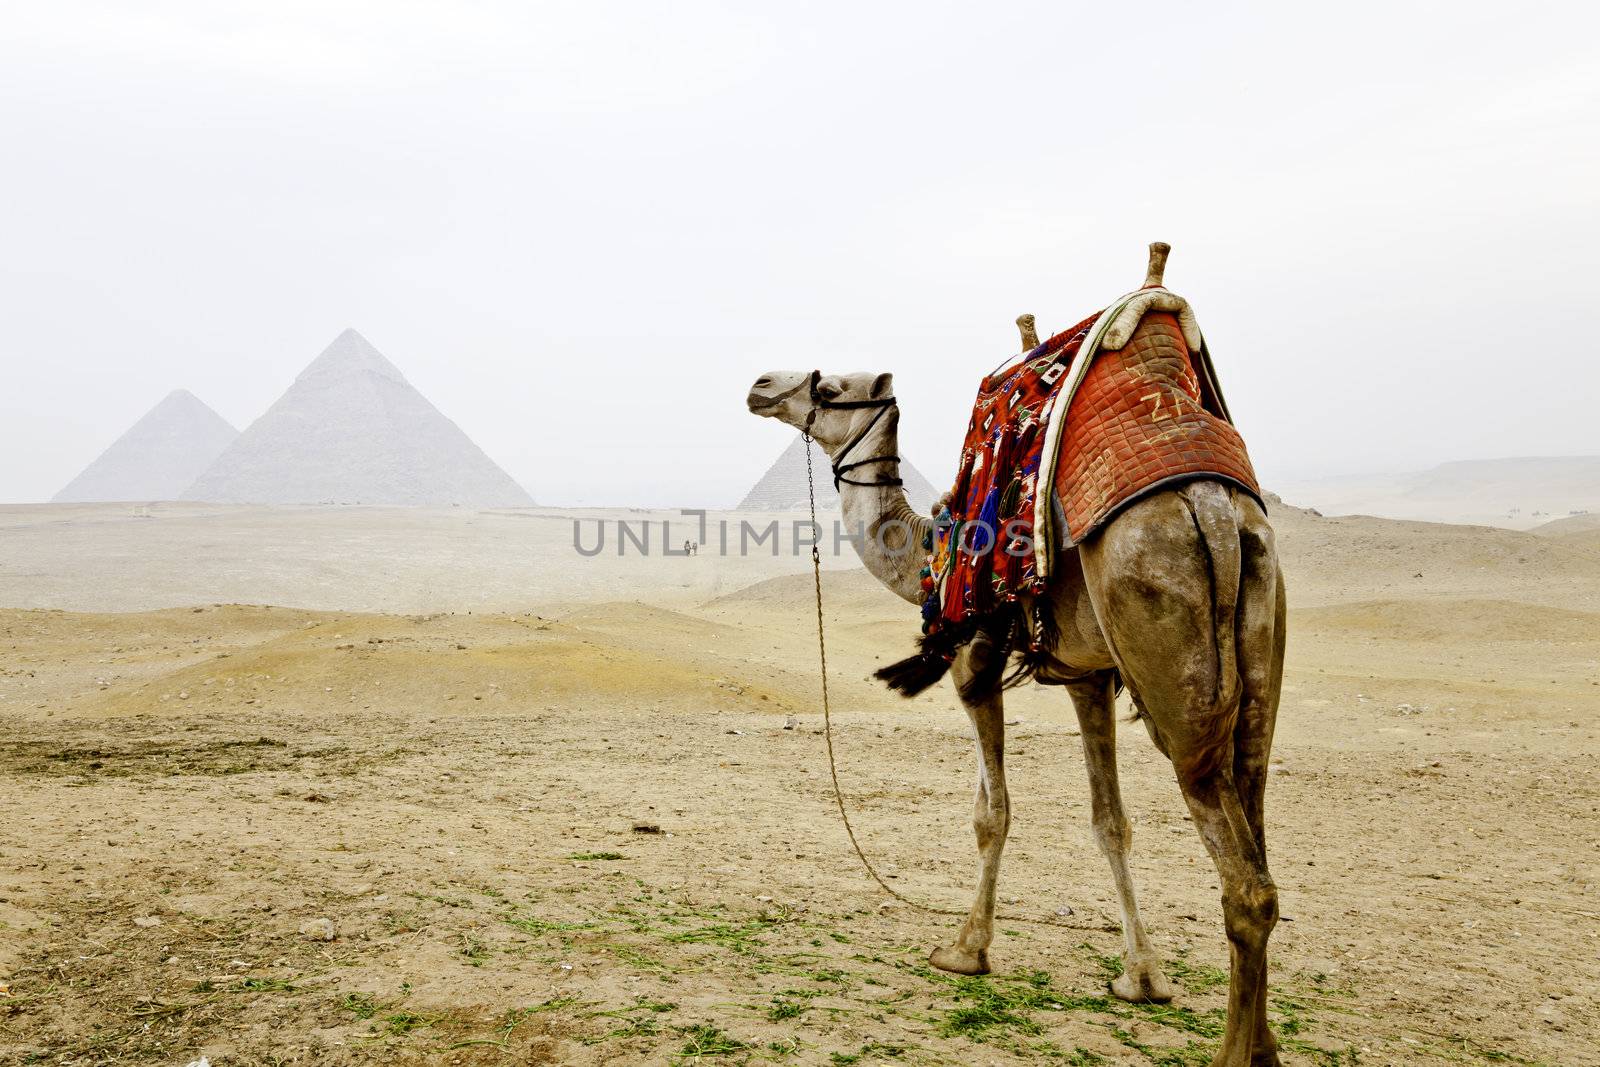 a camel and the pyramids of giza egypt